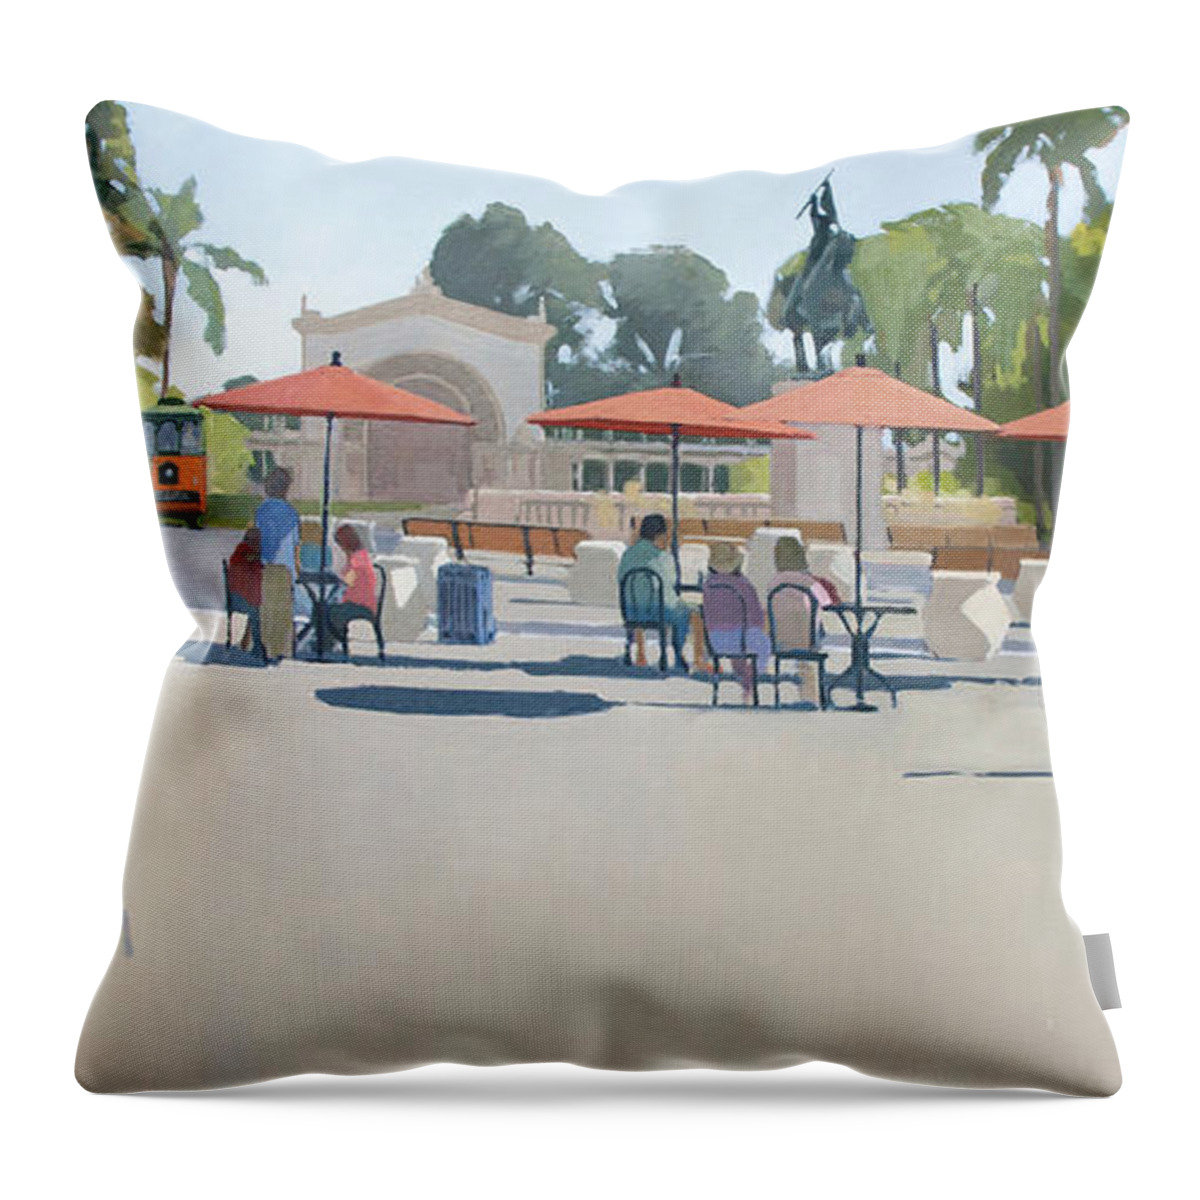 Balboa Park Throw Pillow featuring the painting Leisure Time, Balboa Park - San Diego, California by Paul Strahm